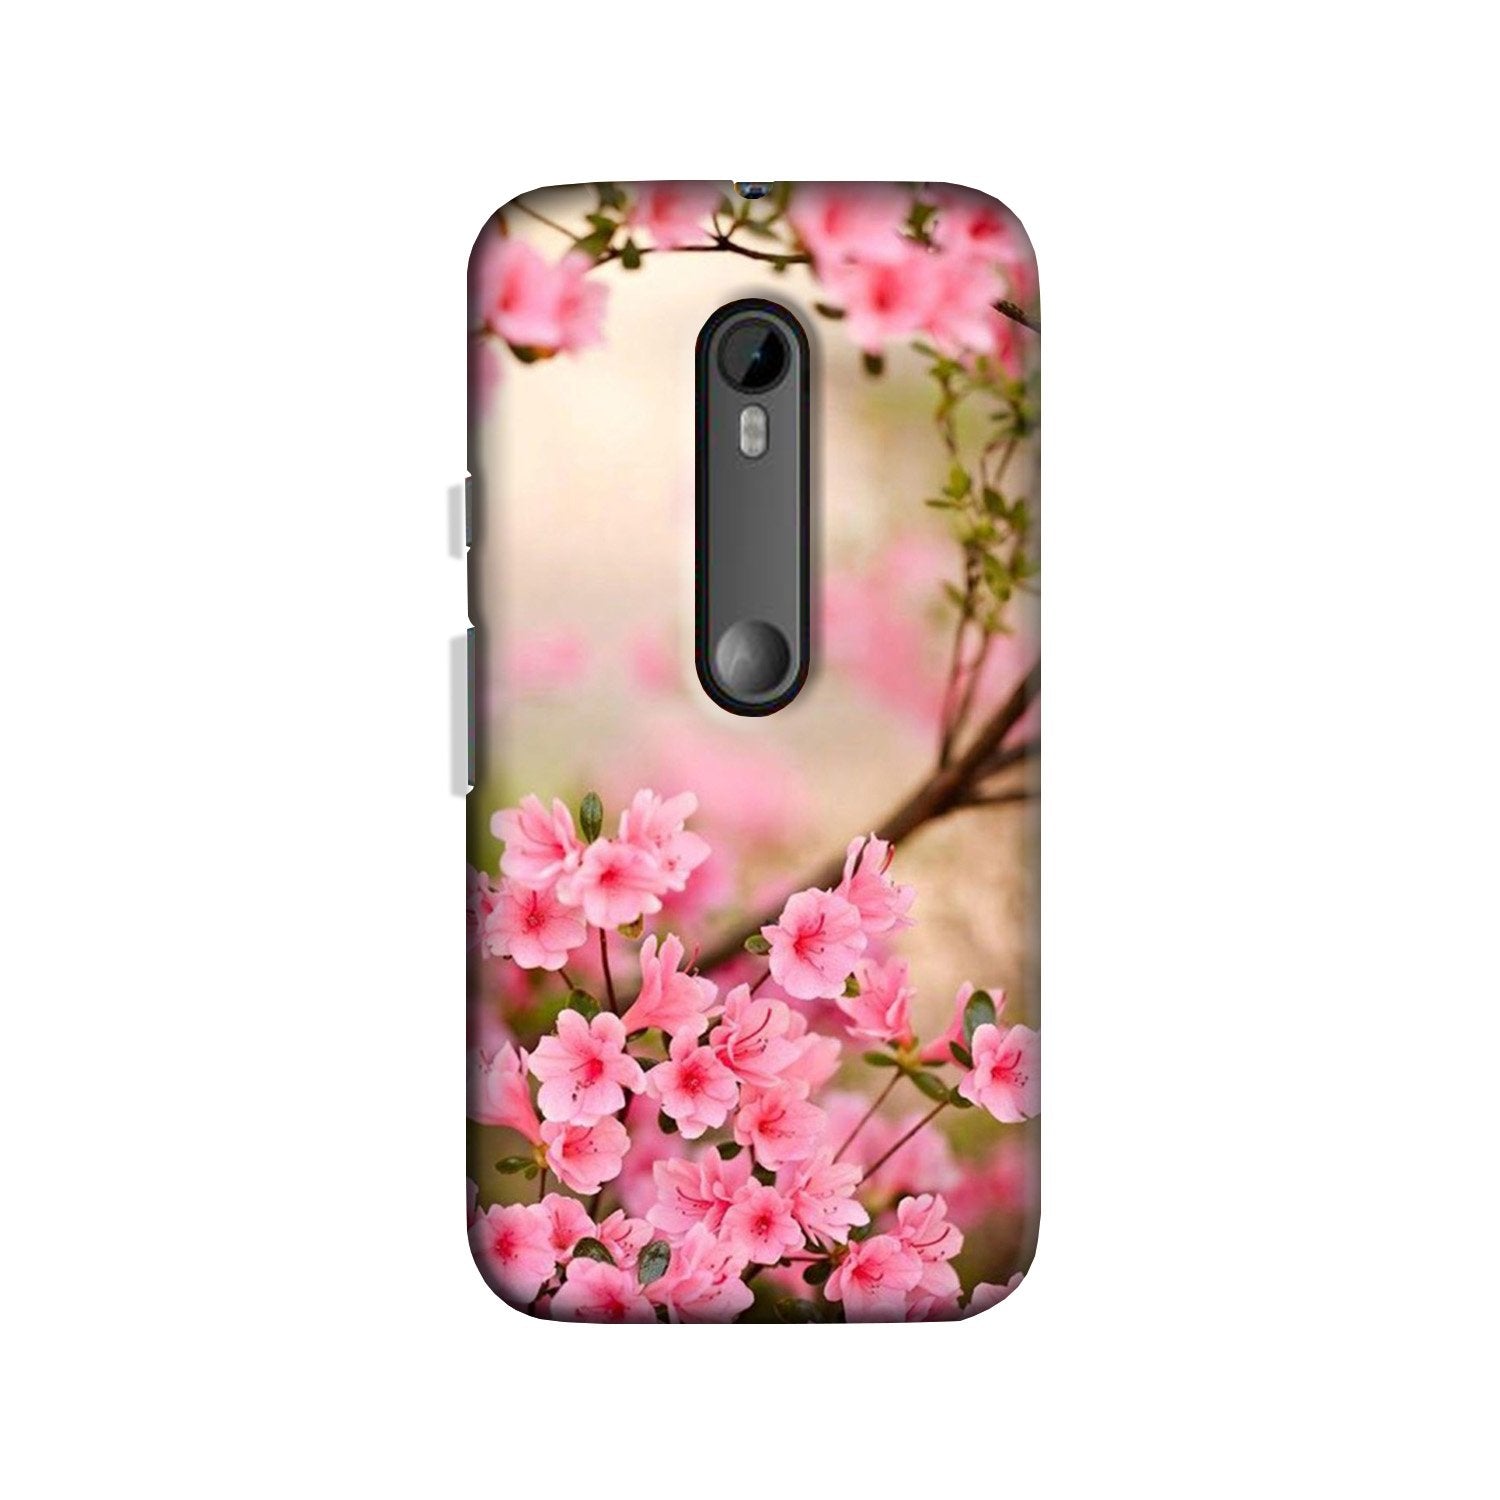 Pink flowers Case for Moto G3